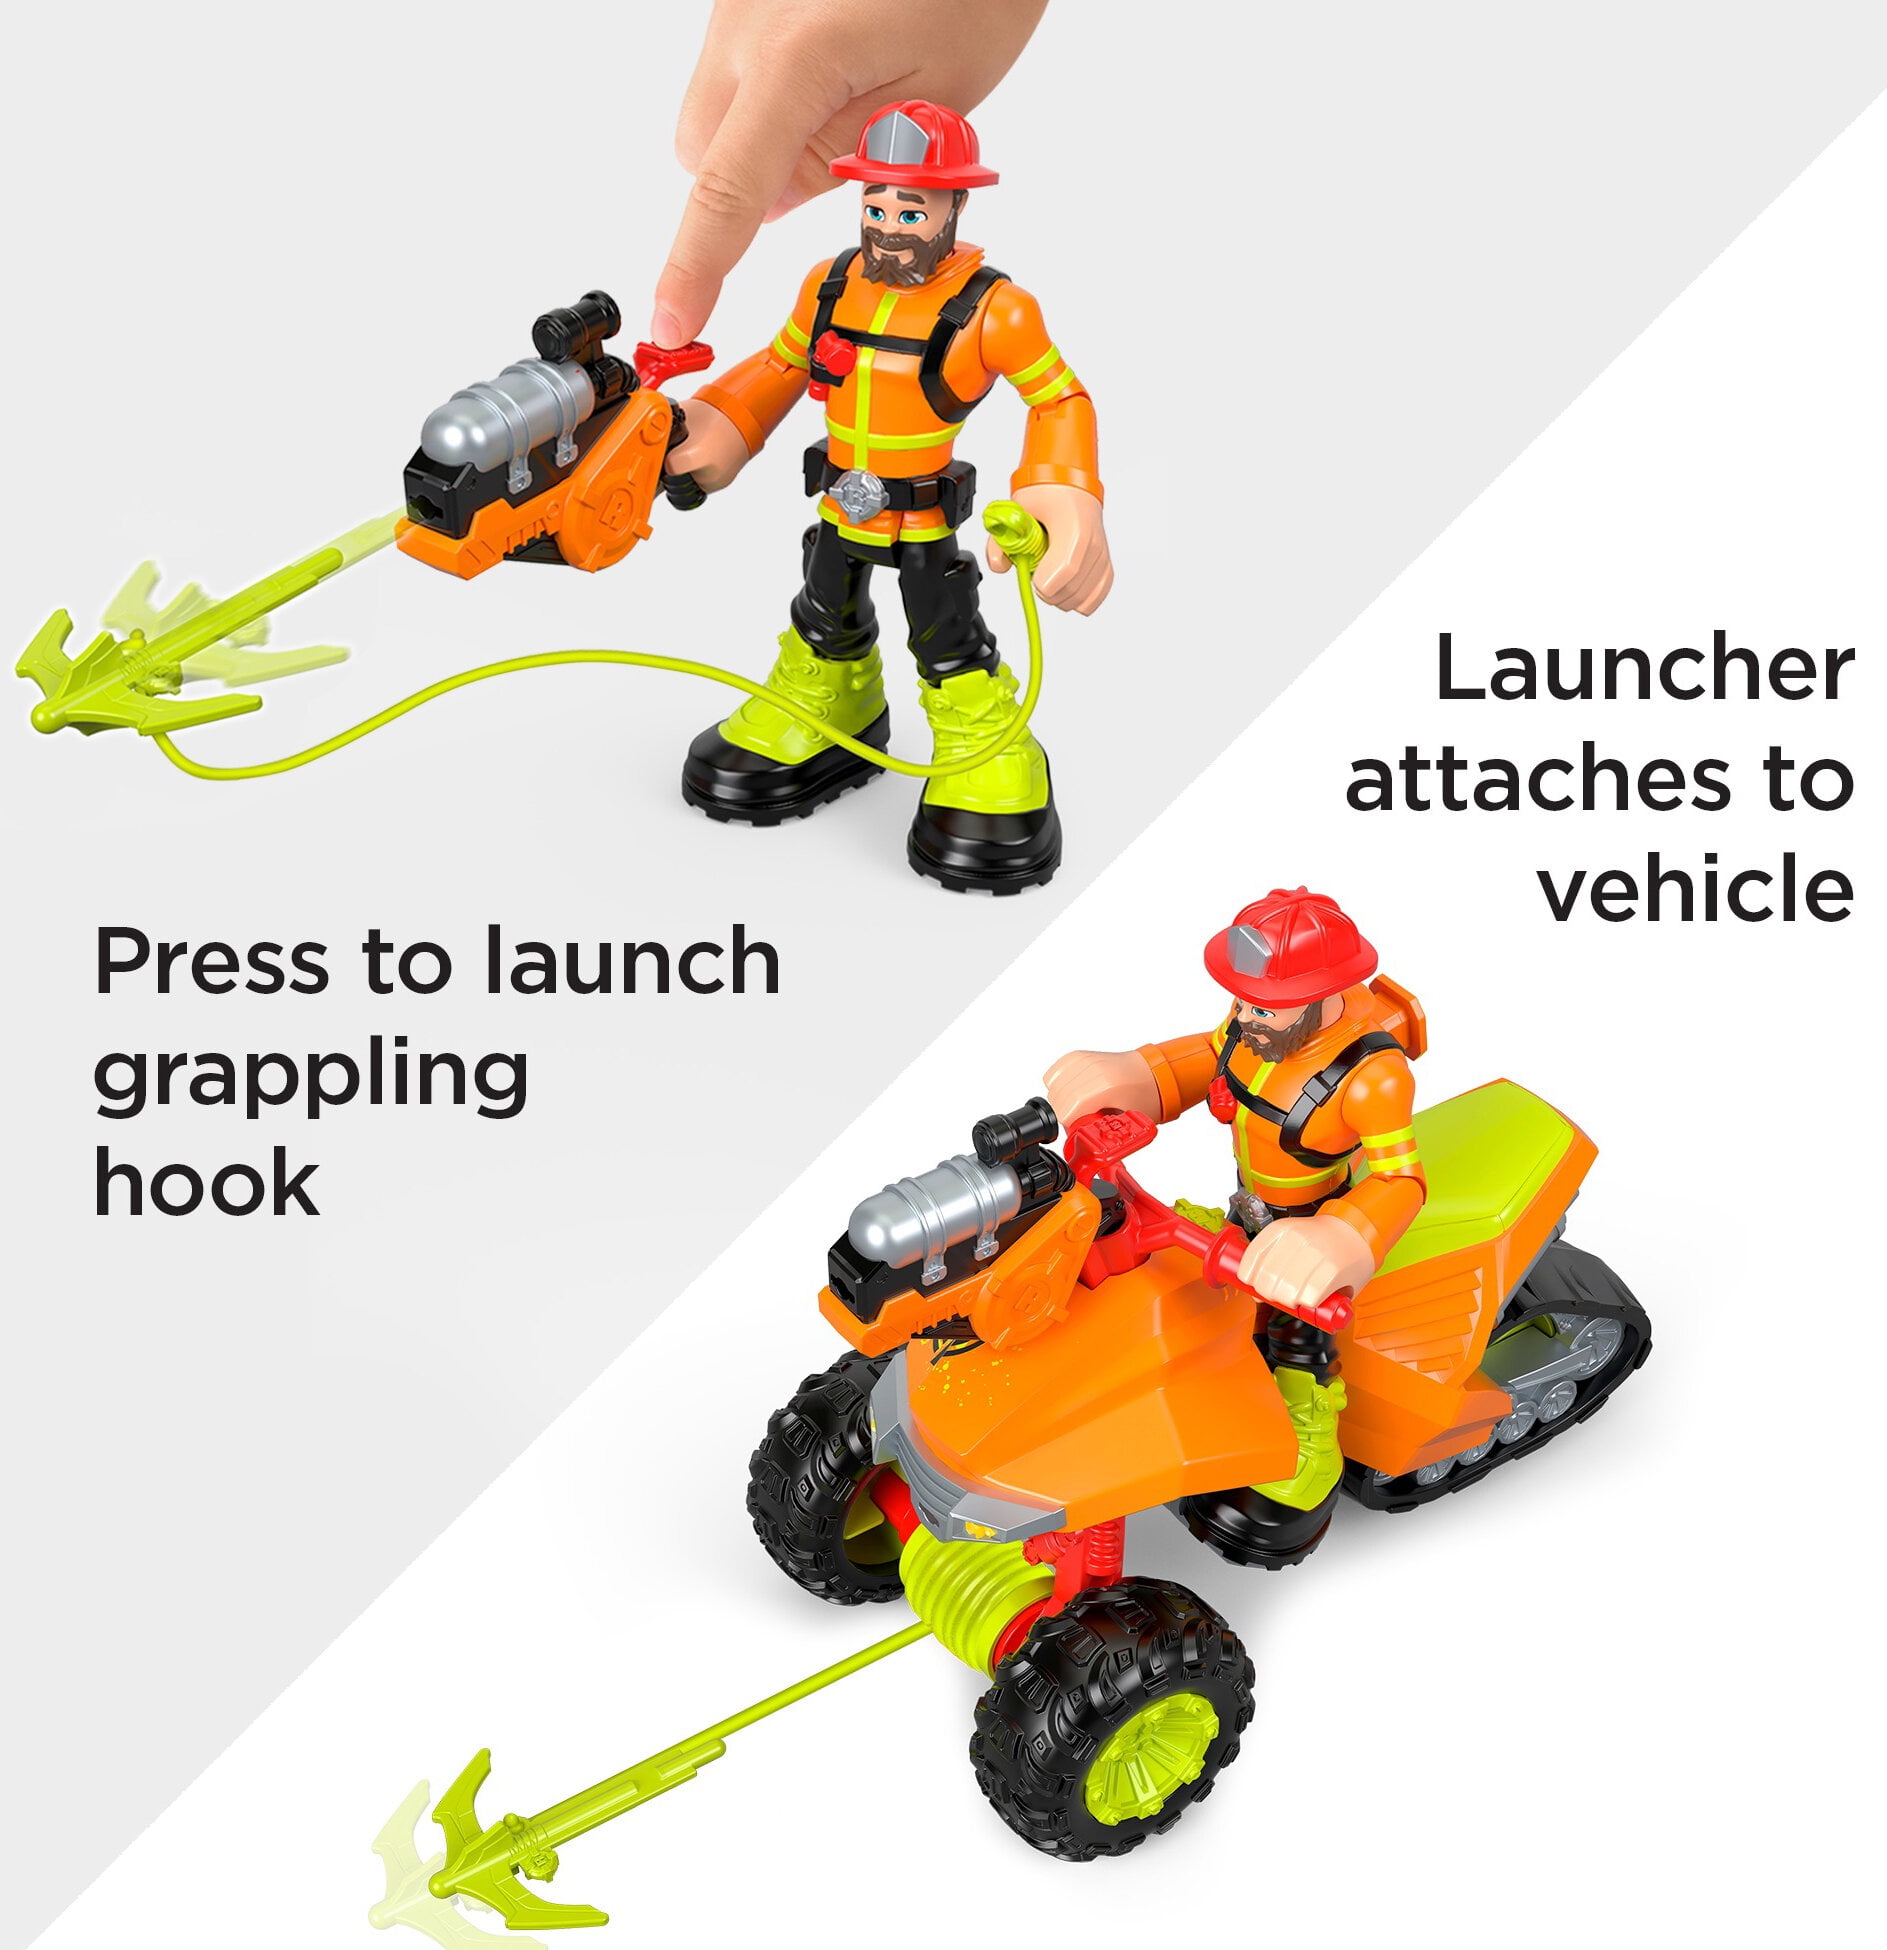 Fisher Price Rescue Heroes FORREST FUEGO 6" Action Figure Firefighter Rescue NEW 